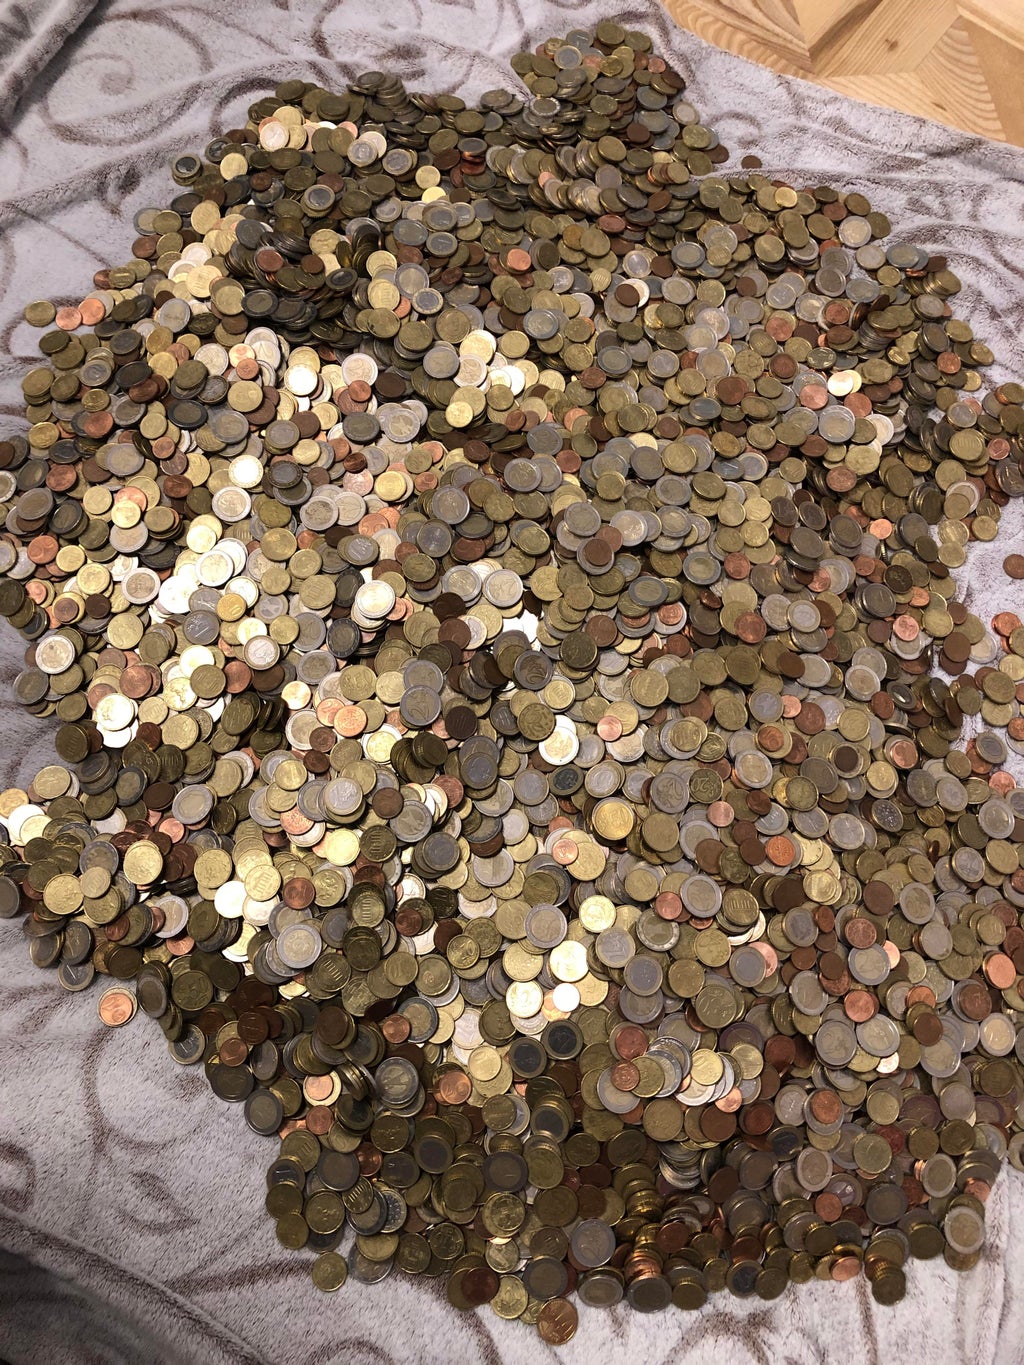 ‘Make cents out of this’: Man saves every coin he’s been given over five years